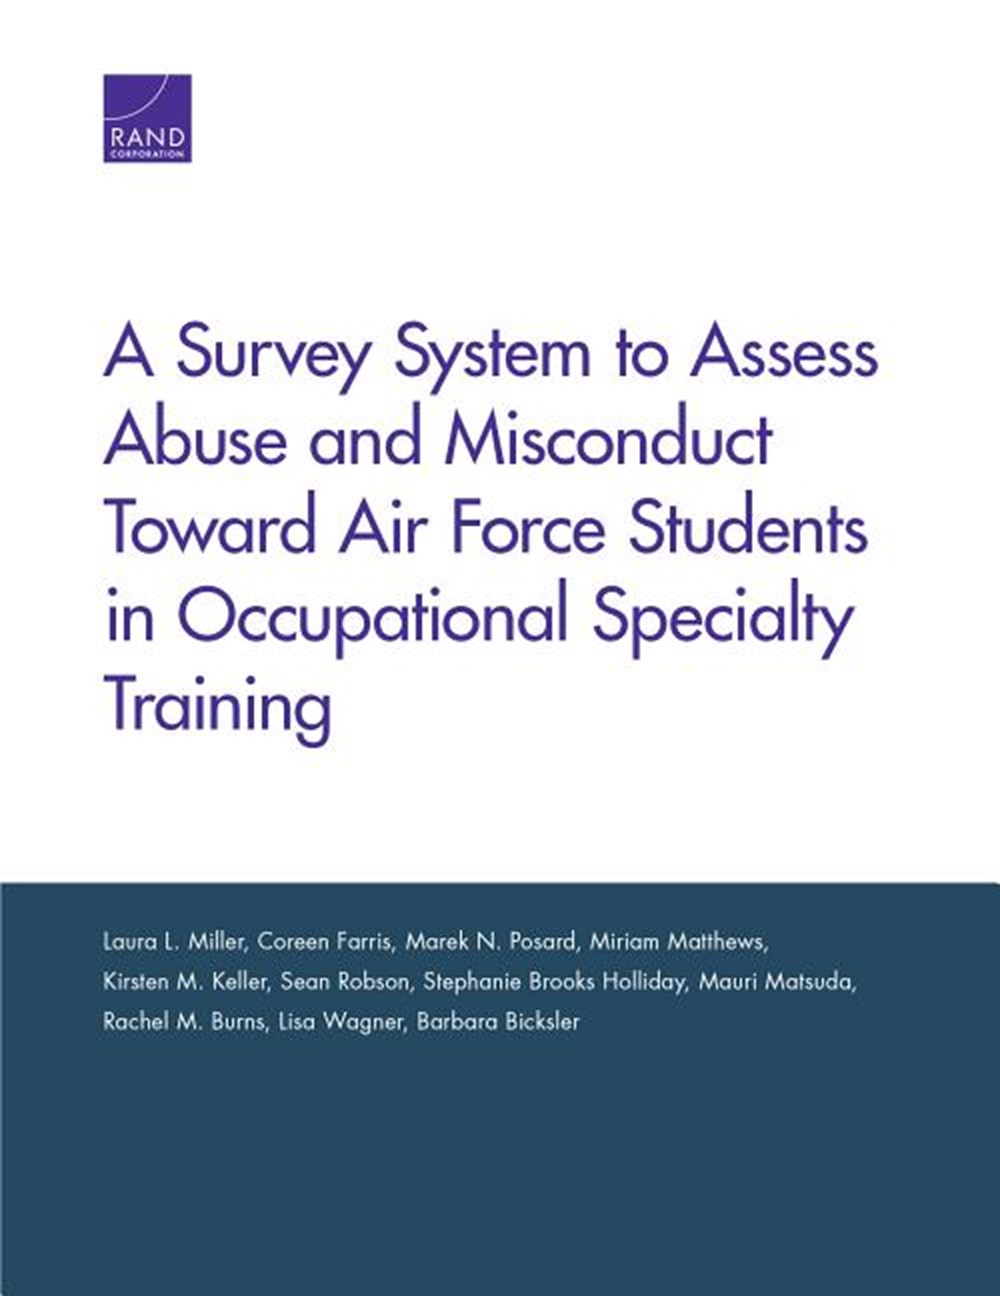 Survey System to Assess Abuse and Misconduct Toward Air Force Students in Occupational Specialty Tra